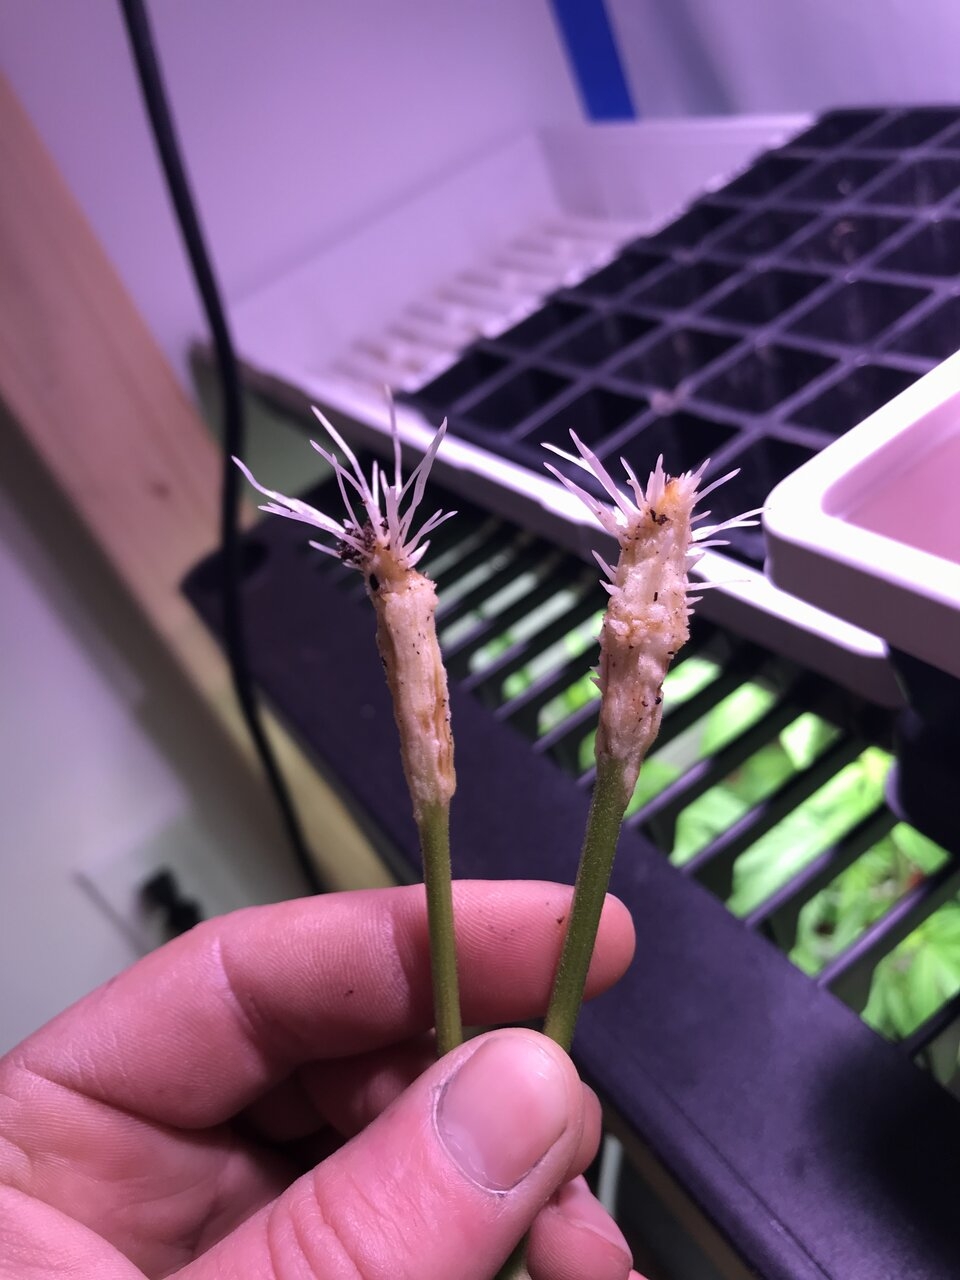 Roots off the clones I took 8 days from cutting